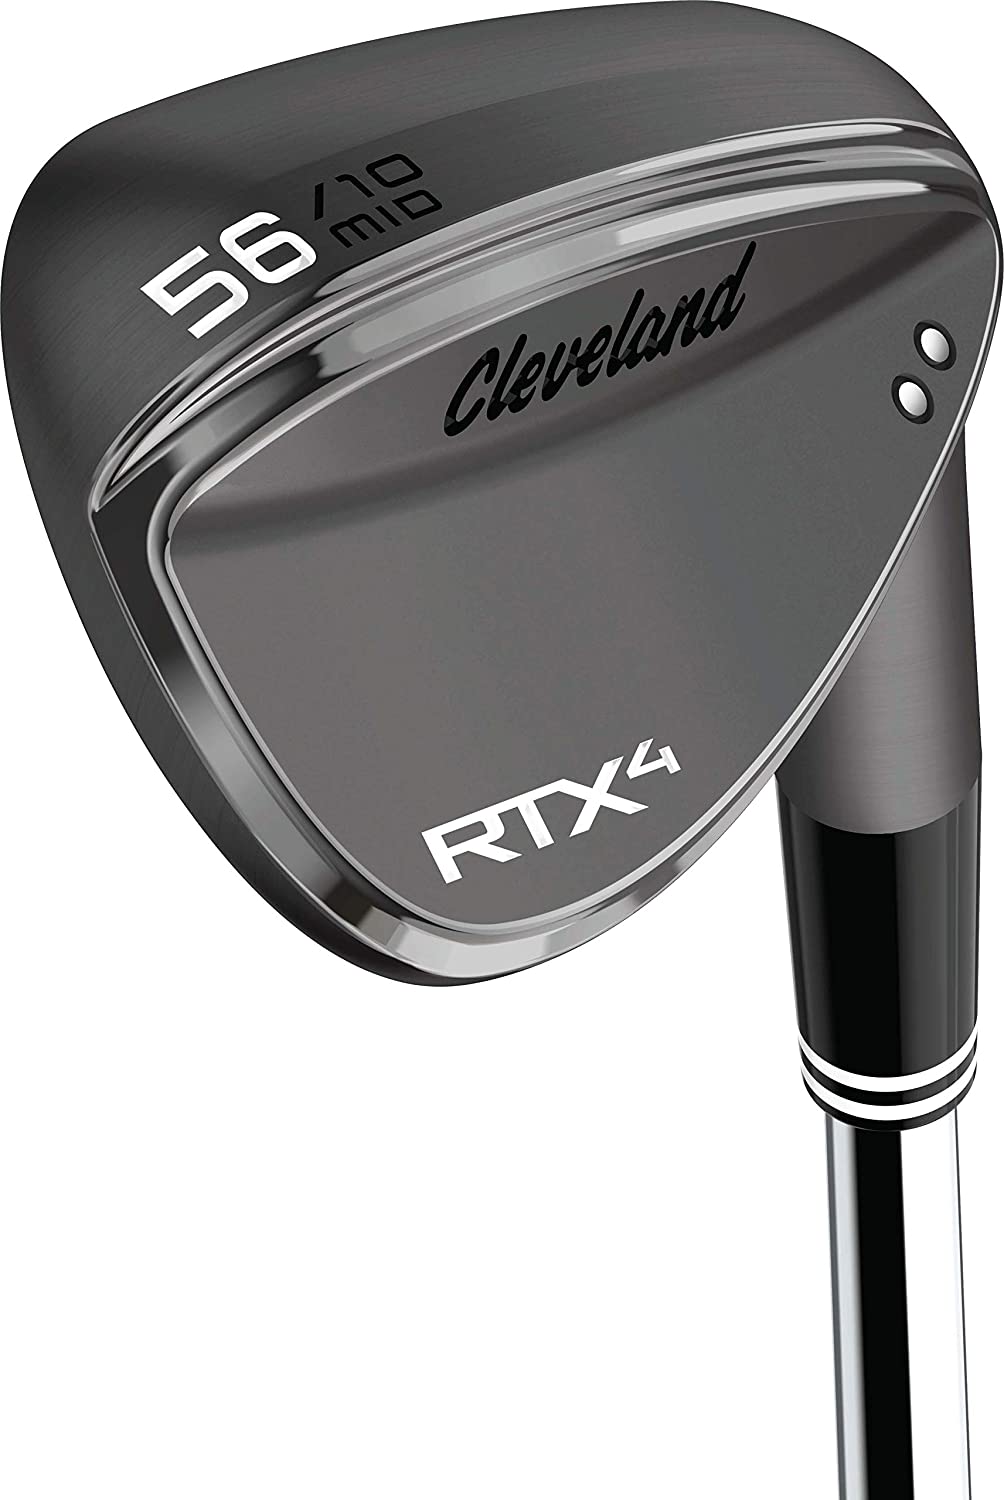 Cleveland Golf Men's RTX 4 Wedge Review: